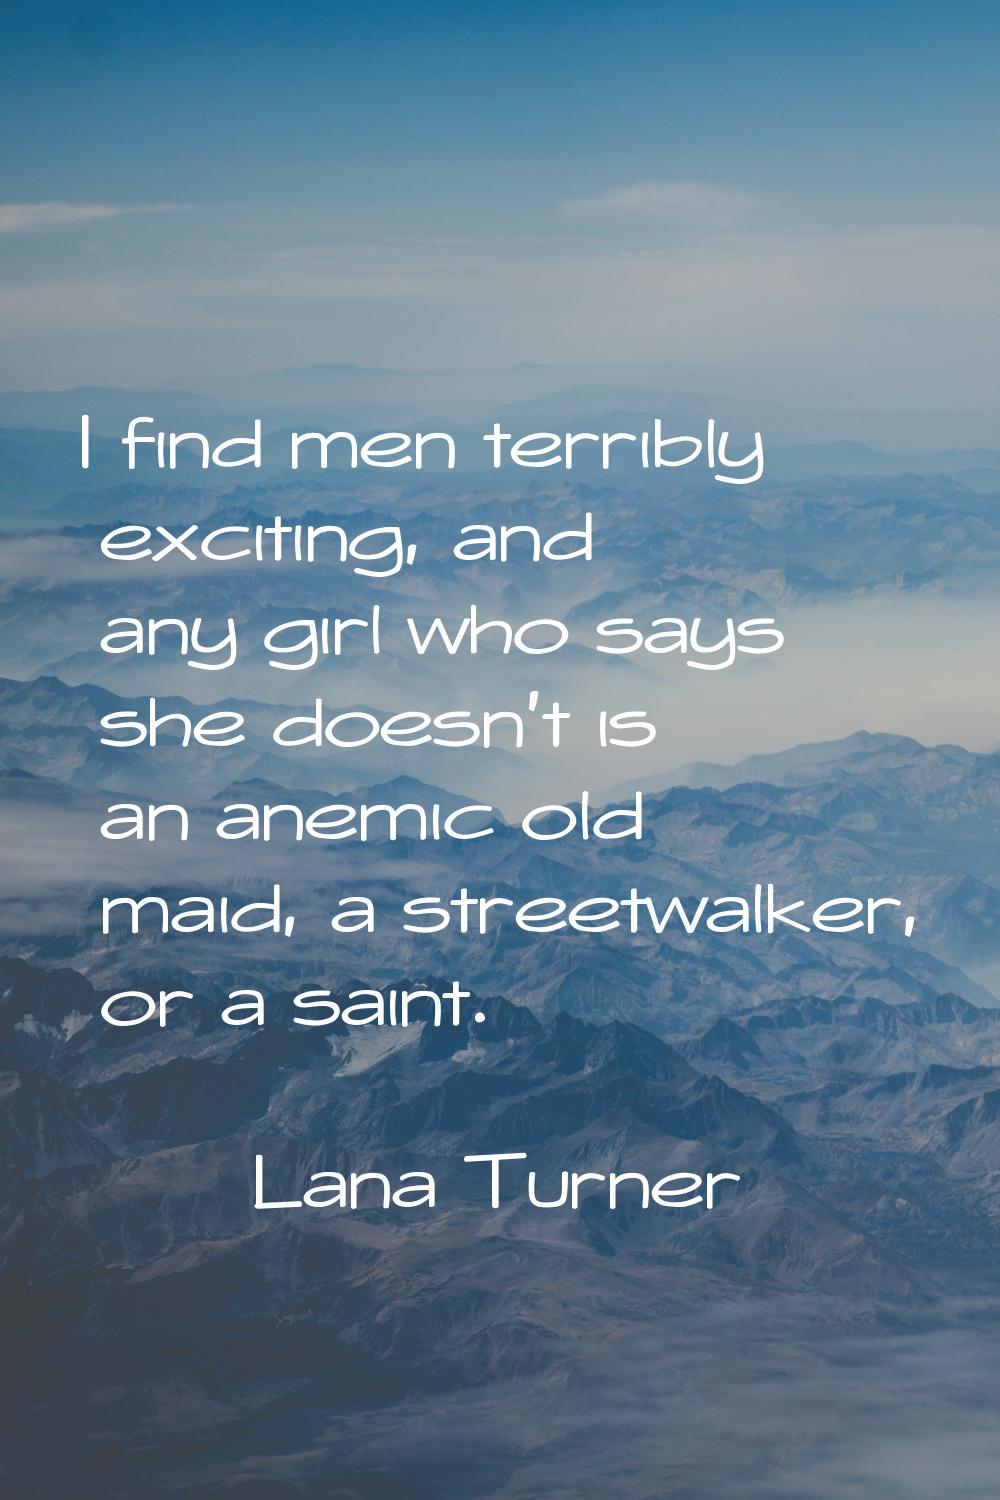 I find men terribly exciting, and any girl who says she doesn't is an anemic old maid, a streetwalk